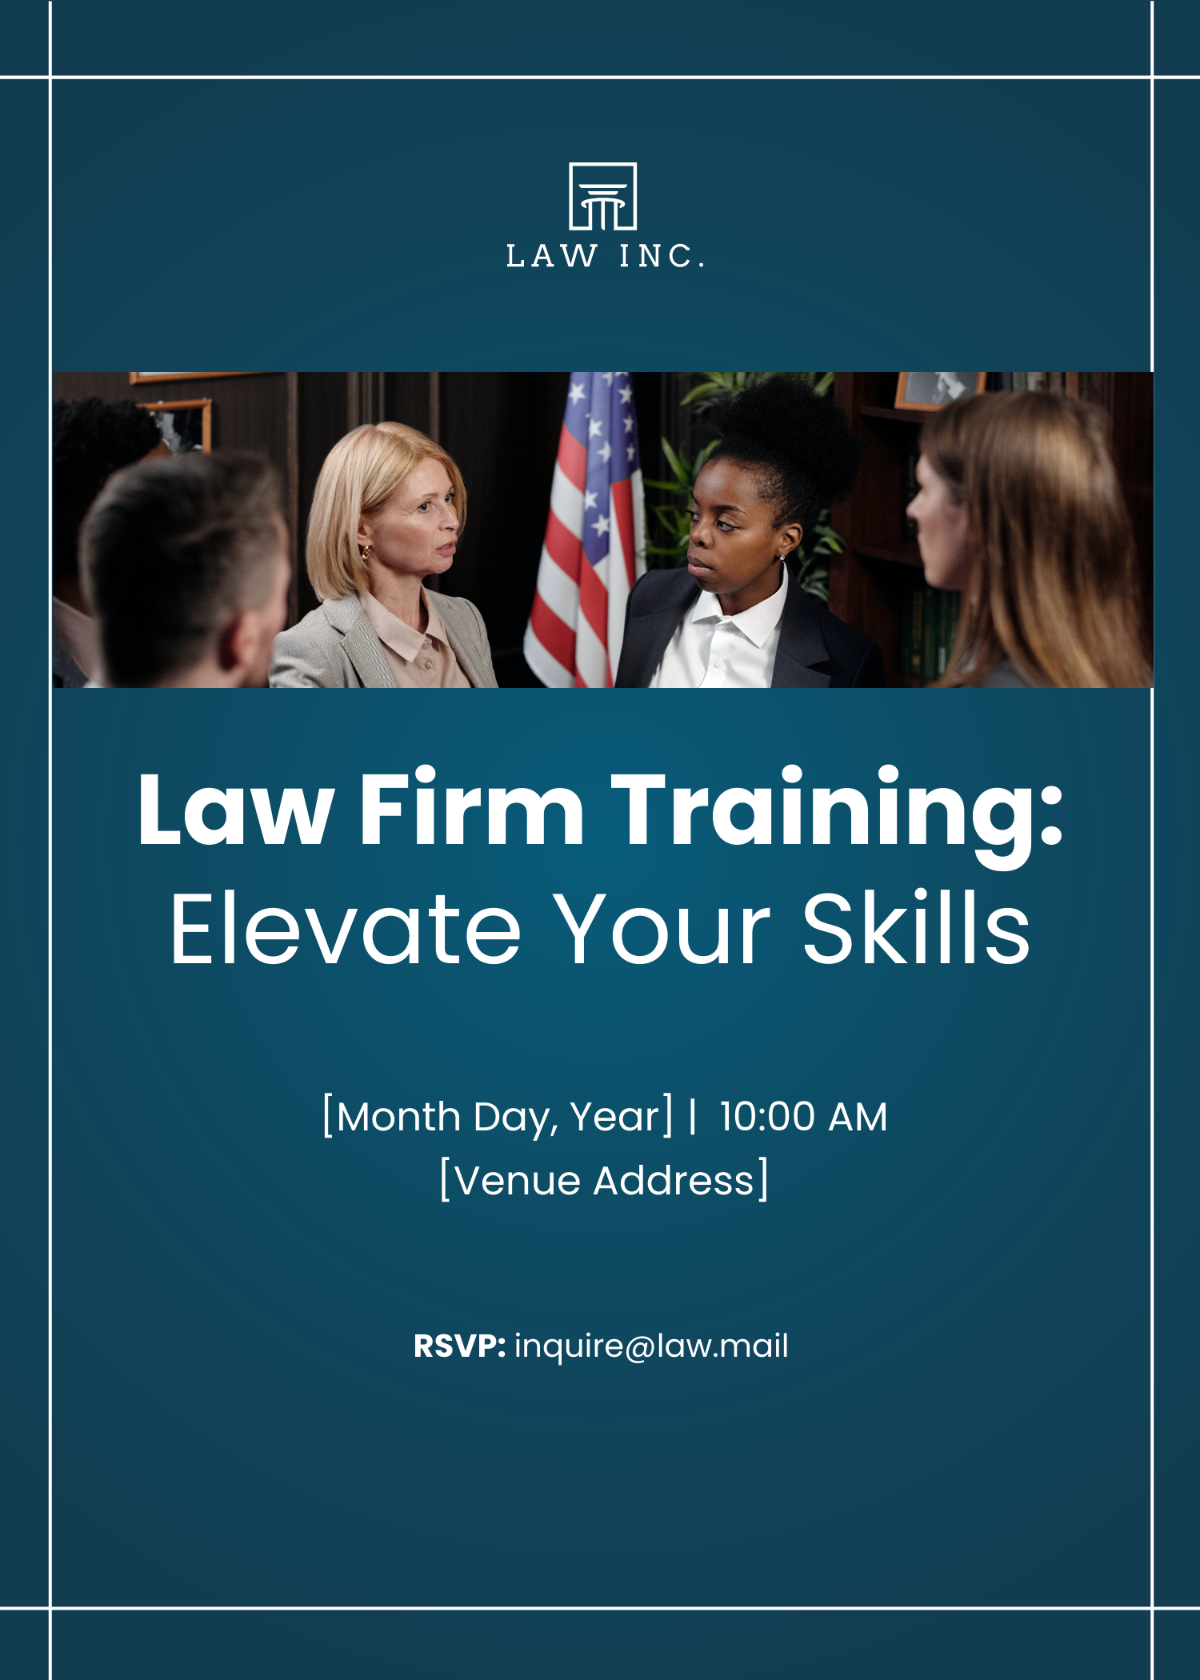 Free Law Firm Training Invitation Template